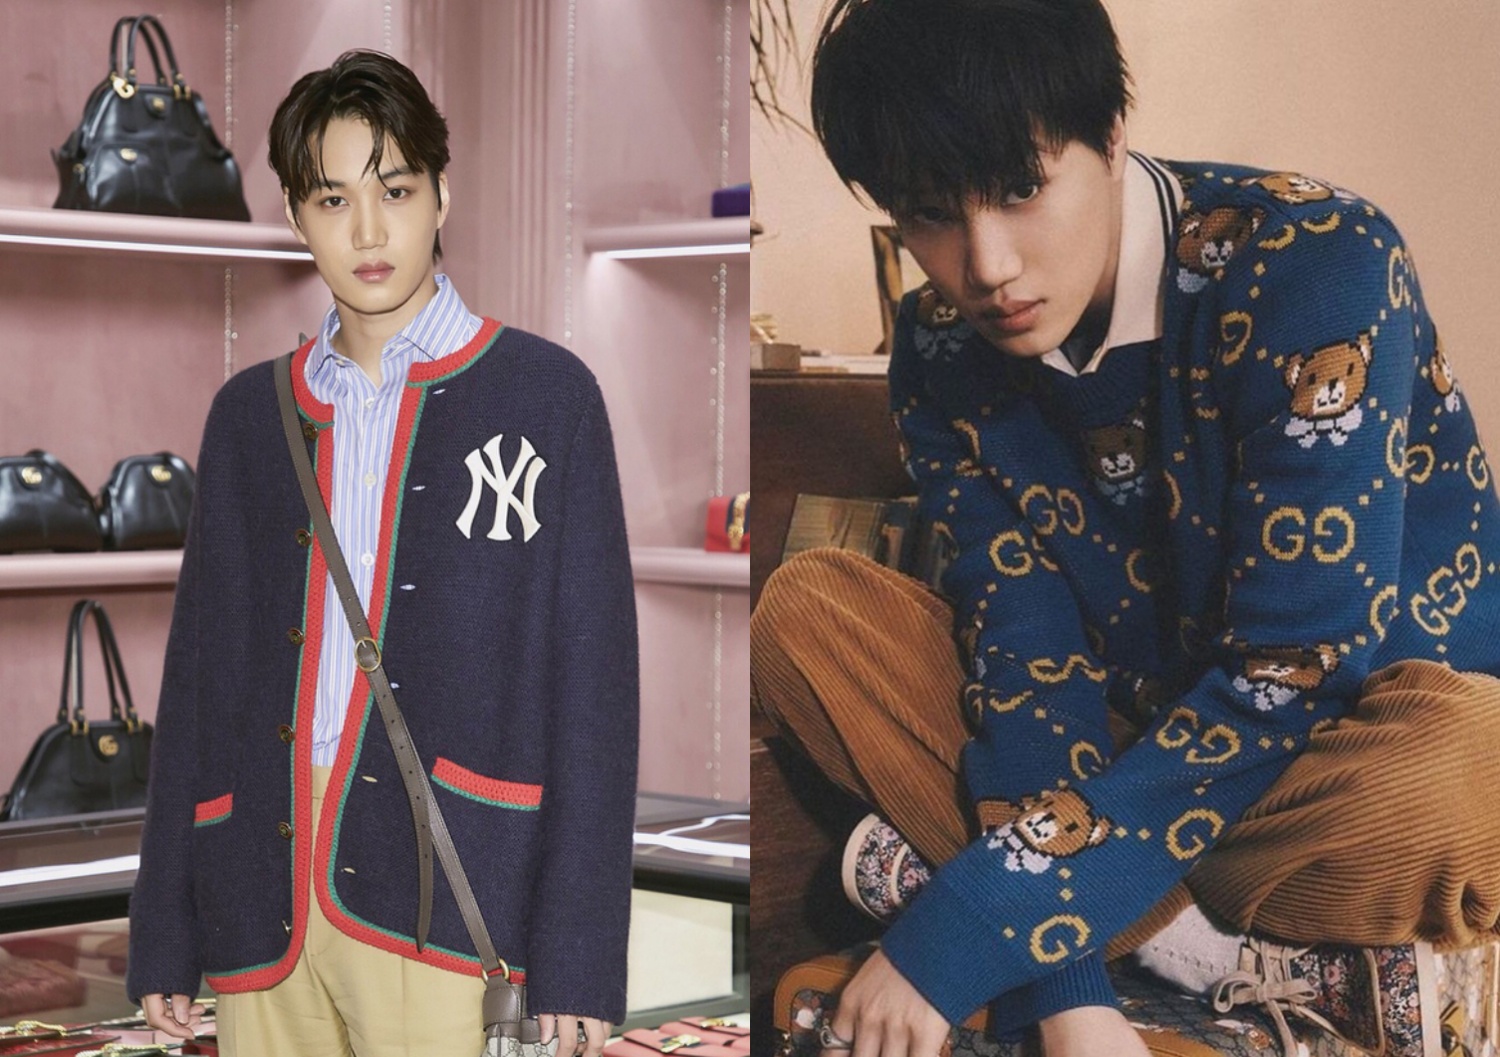 How did EXO's Kai become the biggest K-pop fashion idol of 2021?